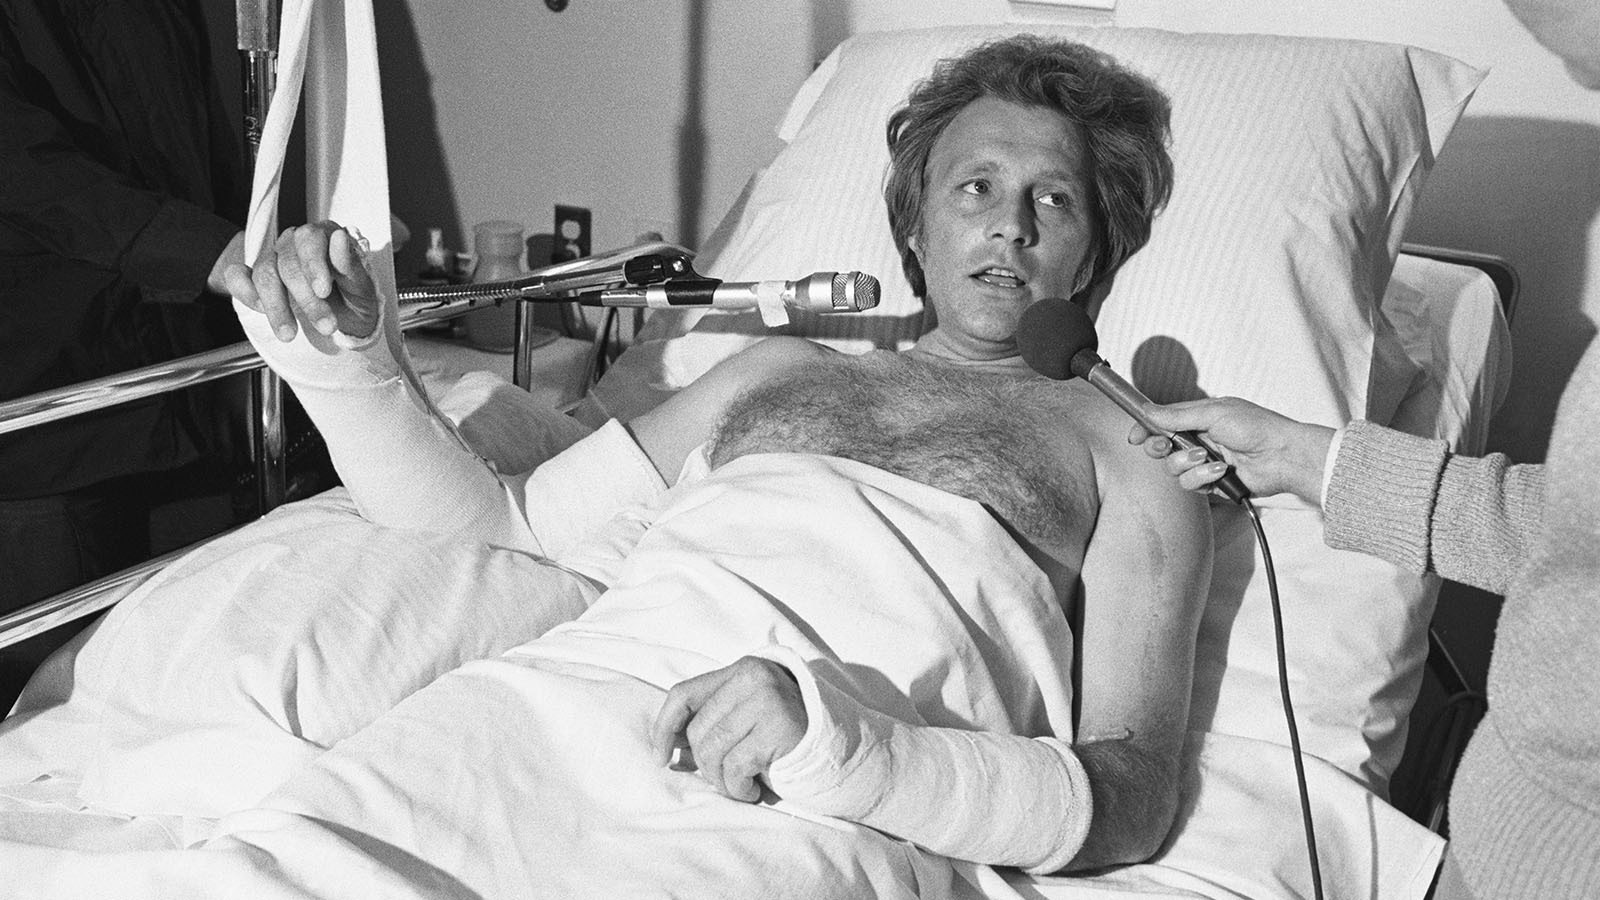 Evel Knievel gives interviews from a hospital bed after losing control on the landing after clearing a pool of sharks.